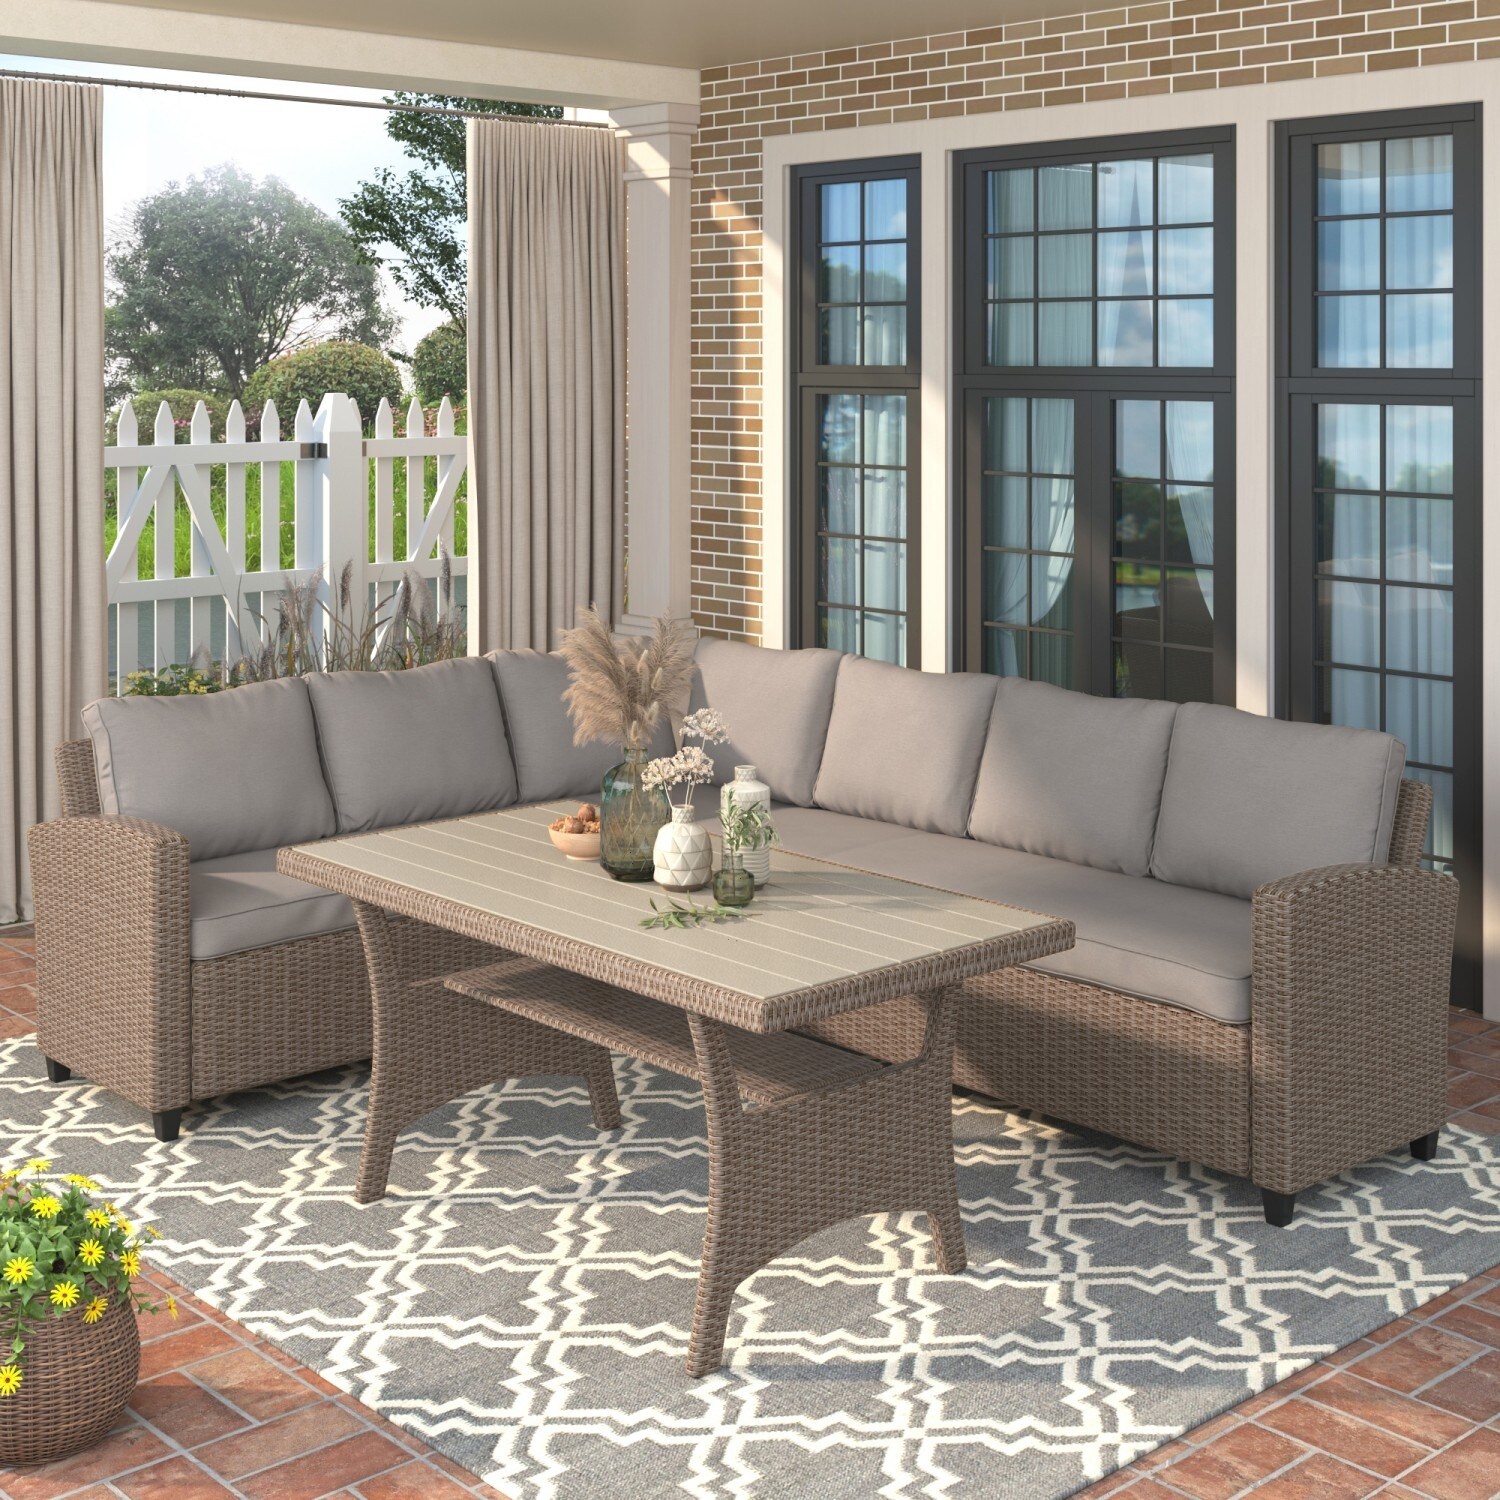 Patio Outdoor Wicker Conversation Sectional Sofa Set With Table  Cushions